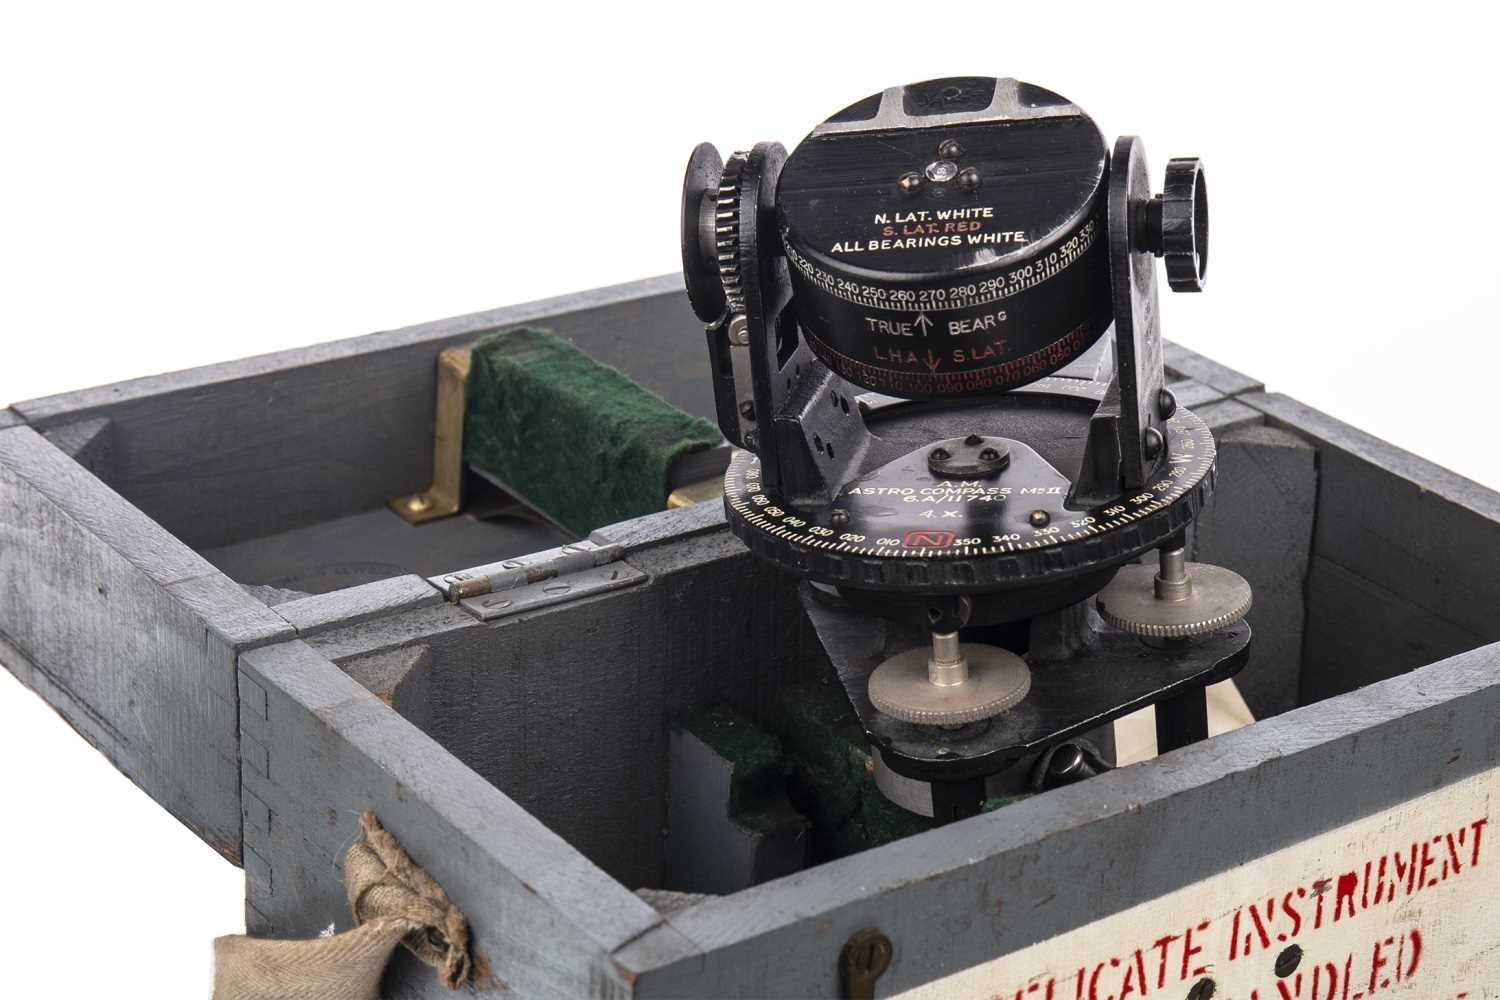 Lot 1387 - A BOXED WWII ASTRO COMPASS MKII